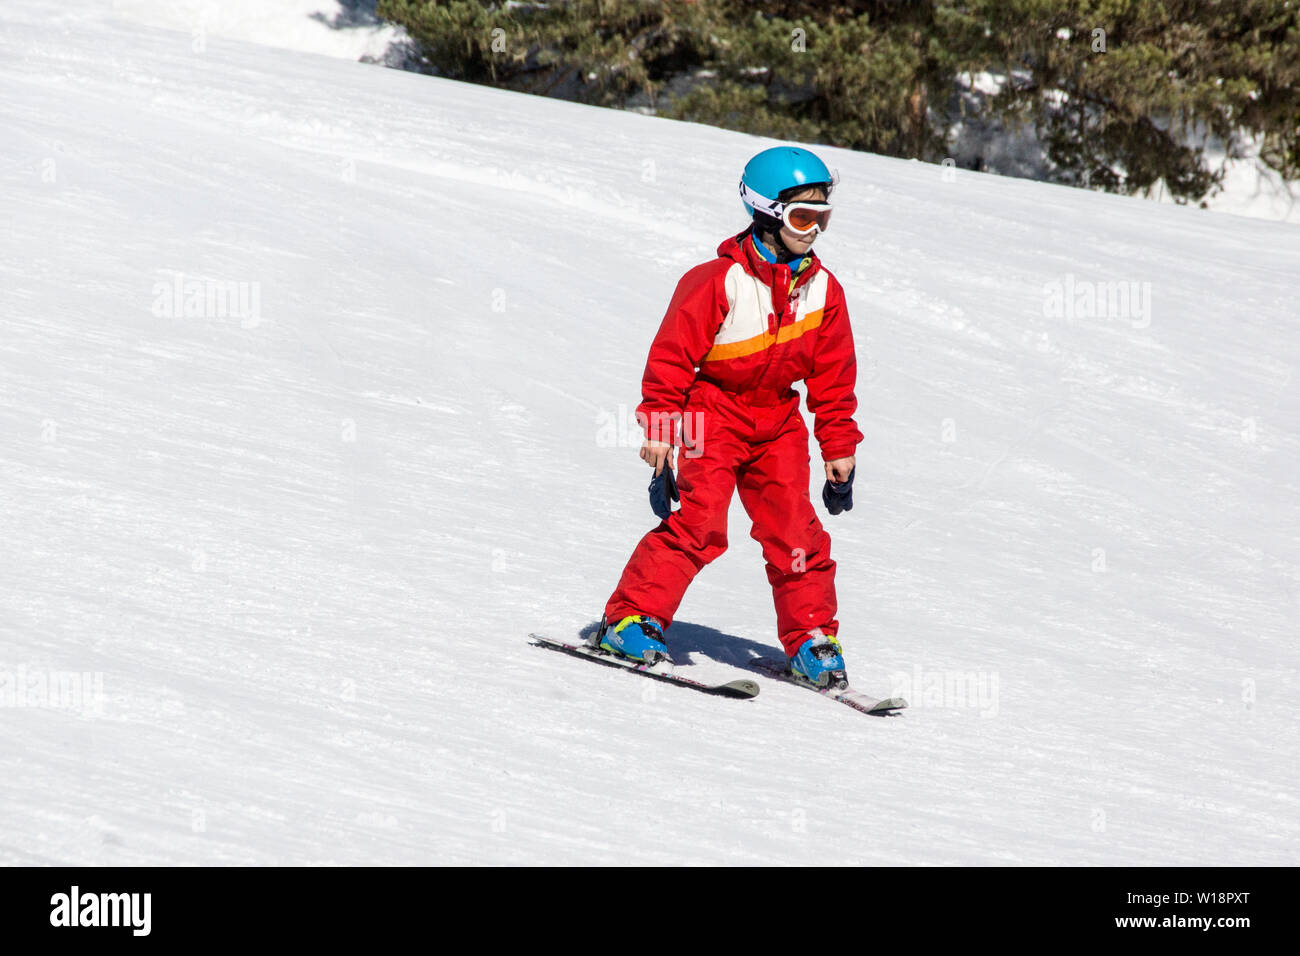 The central Pyrenees at Pont Espagne. Young girl learning to ski.No sticks. Stock Photo